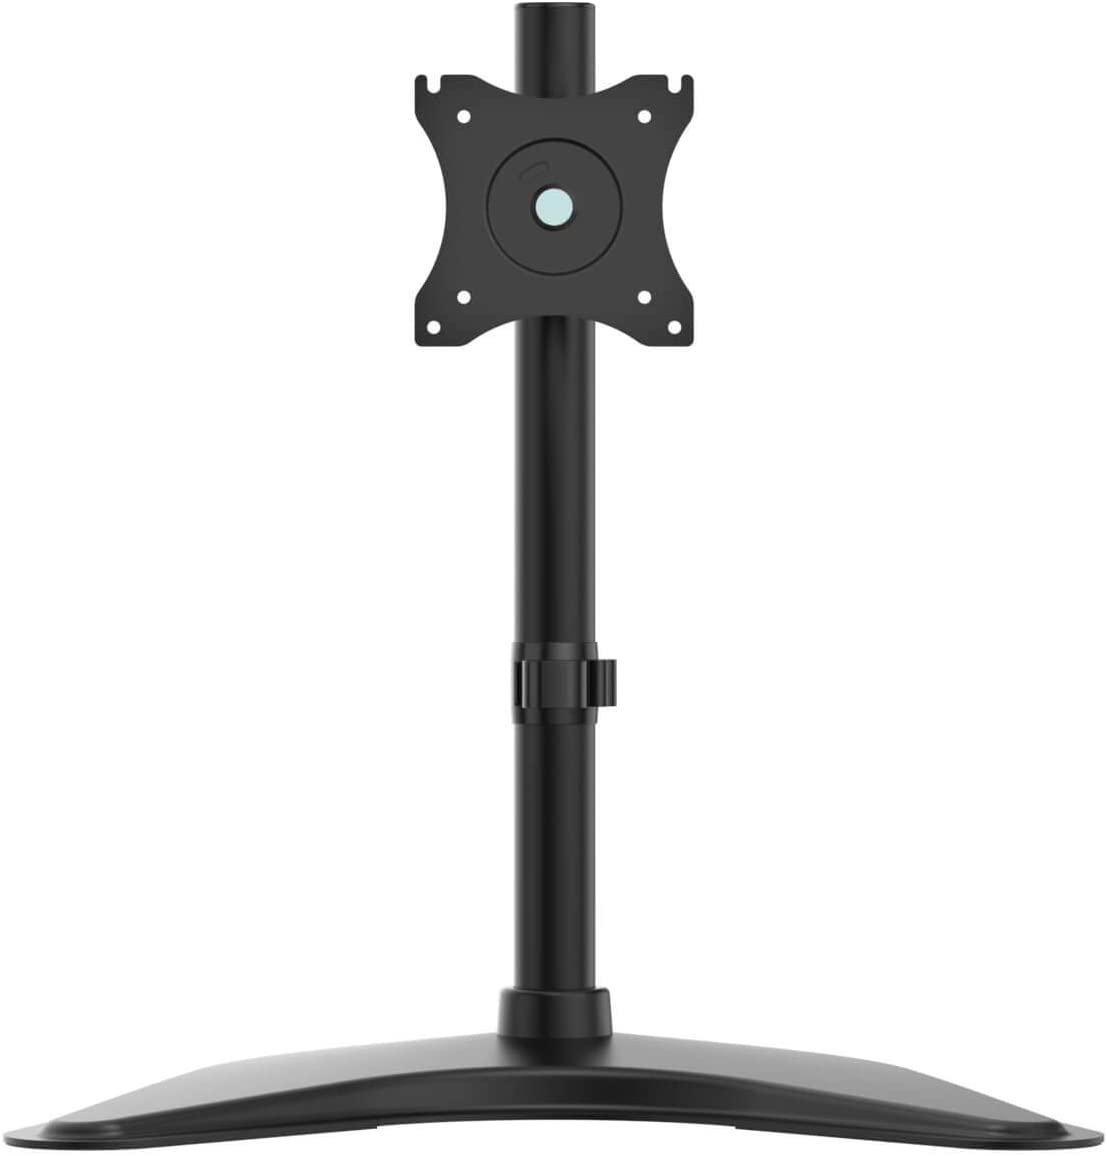 Tripp Lite Monitor Mount, Single Display Desktop Monitor Stand for 13” to 27” Flat-Screen Displays (DDR1327SE)